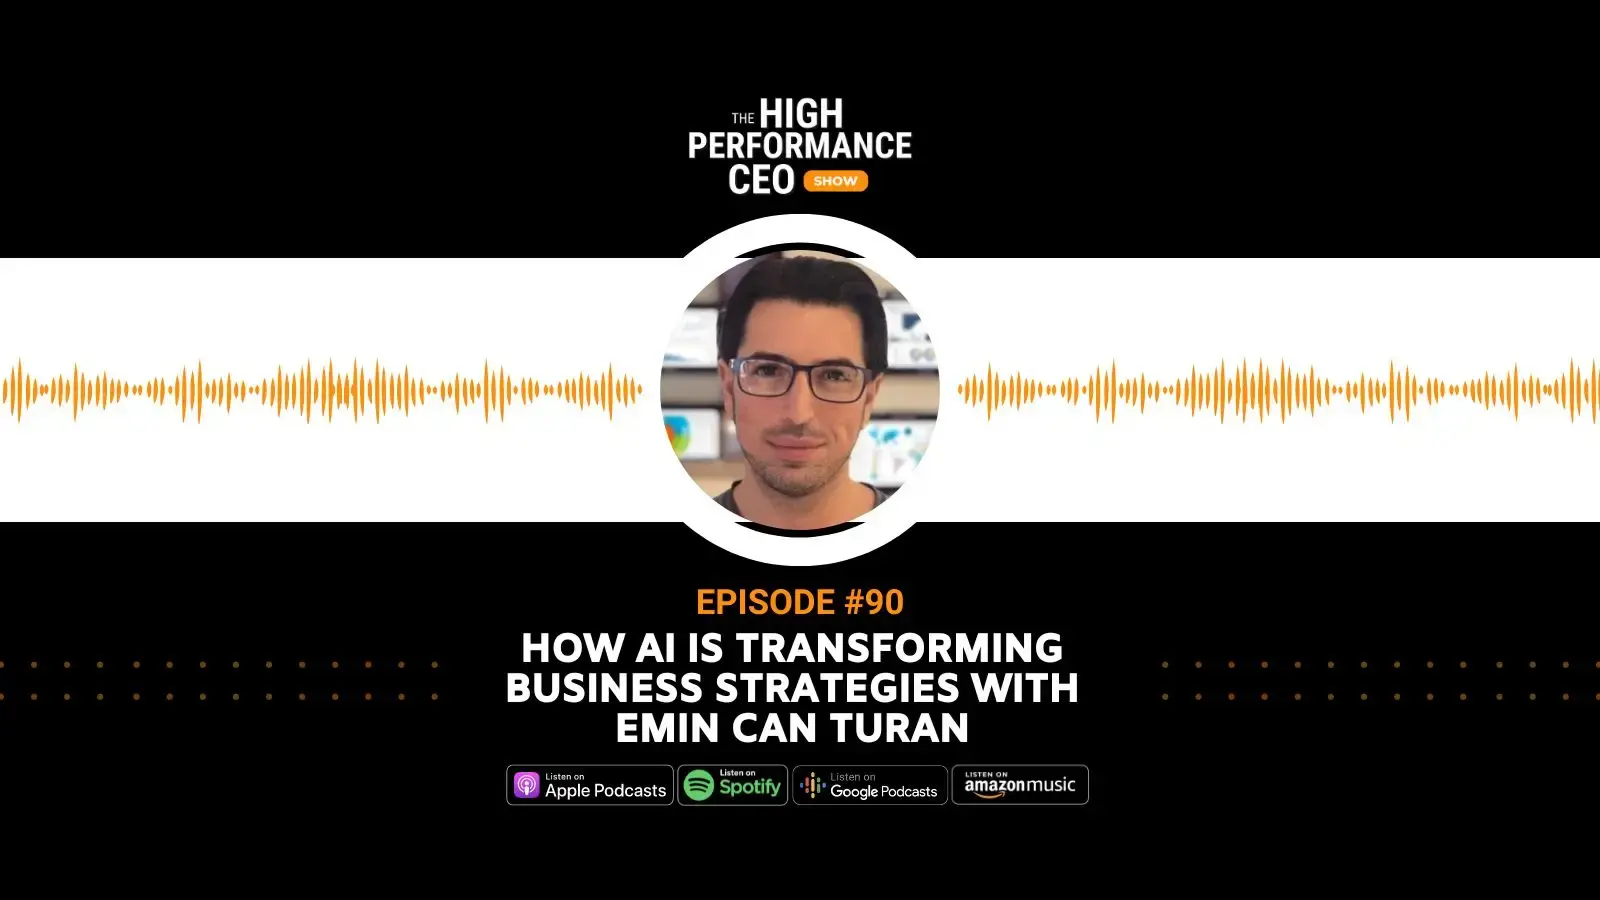 How AI is Transforming Business Strategies with Emin Can Turan